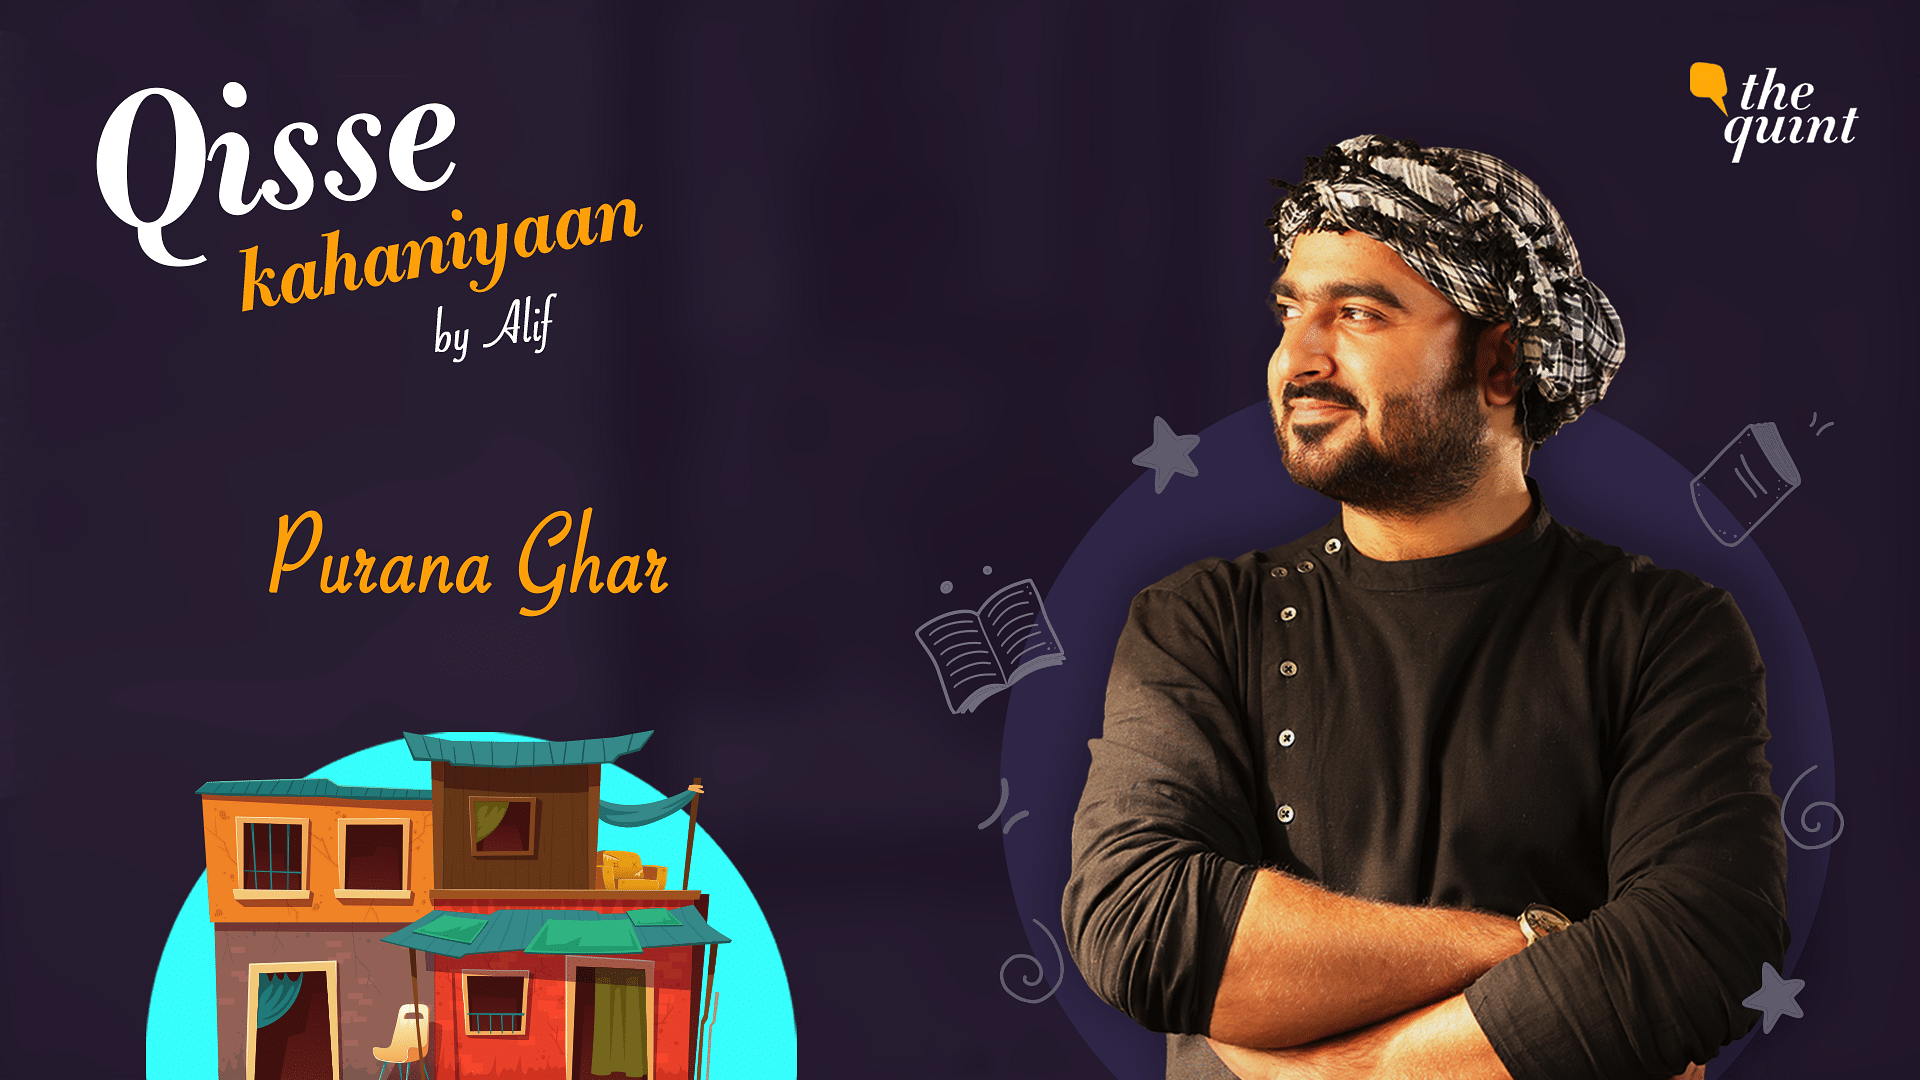 <div class="paragraphs"><p>Tune in to the second episode of The Quint's new podcast series, 'Qisse Kahaniyaan by Alif', as he tells you the story of a 'Purana Ghar'.</p></div>